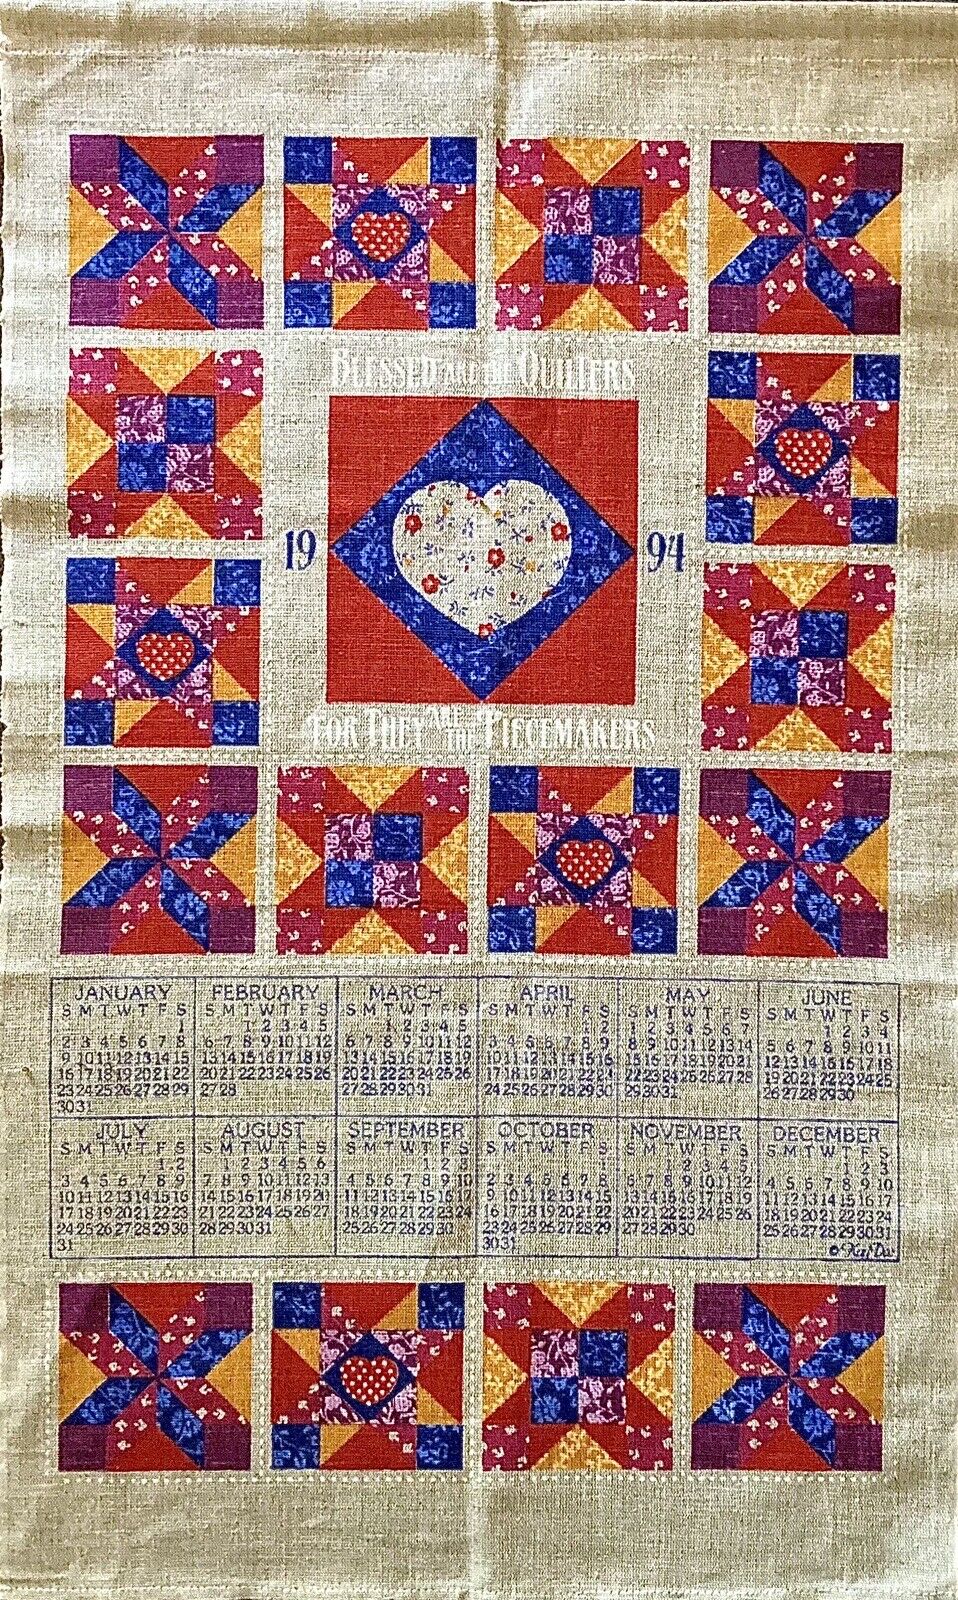 1994 Piecemakers Linen Calendar Towel “Blessed Are The Quilters”